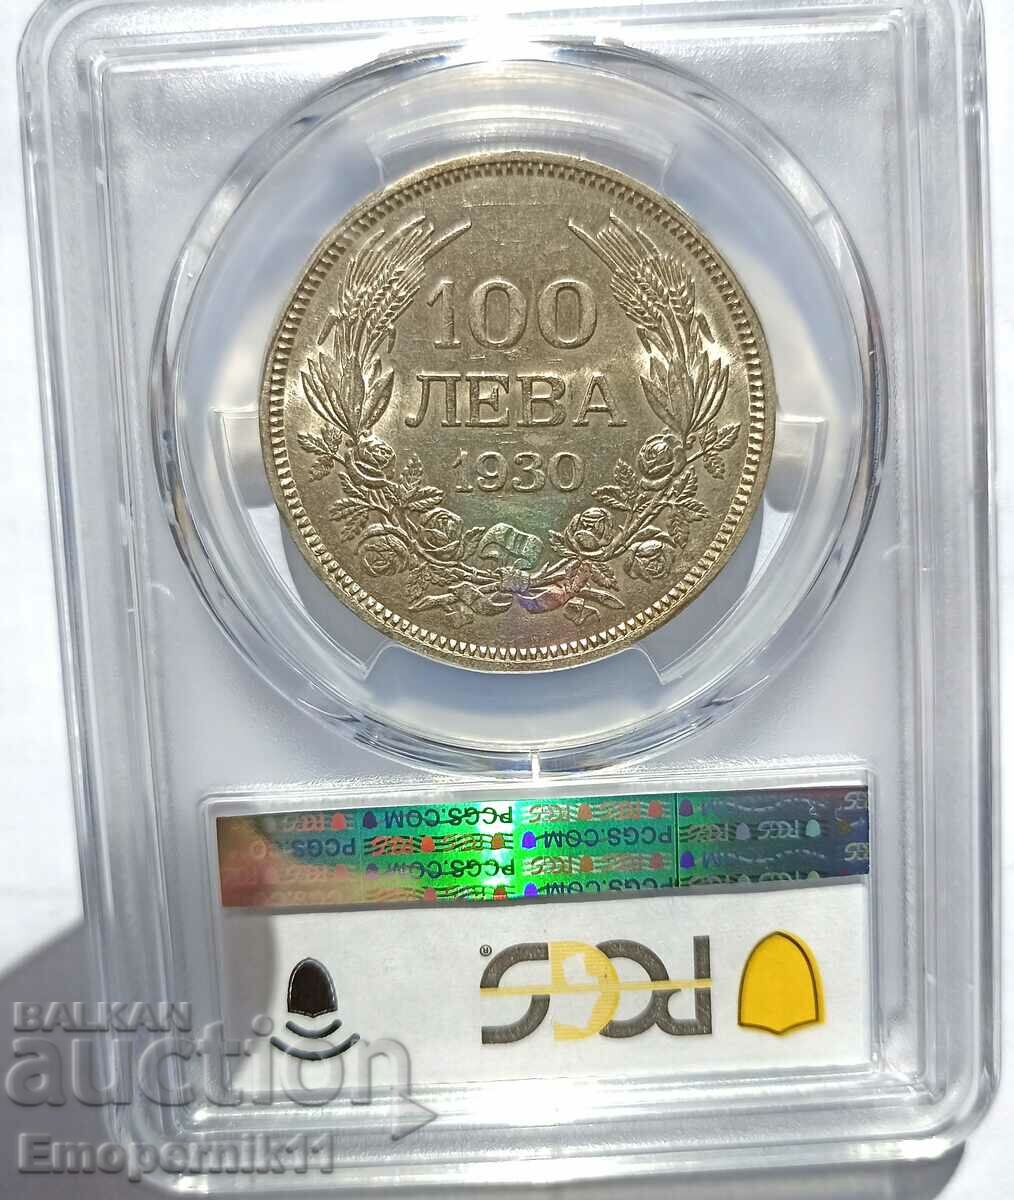 BZC 100 BGN 1930 - Certified PCGS AU58 starting from 1 cent.